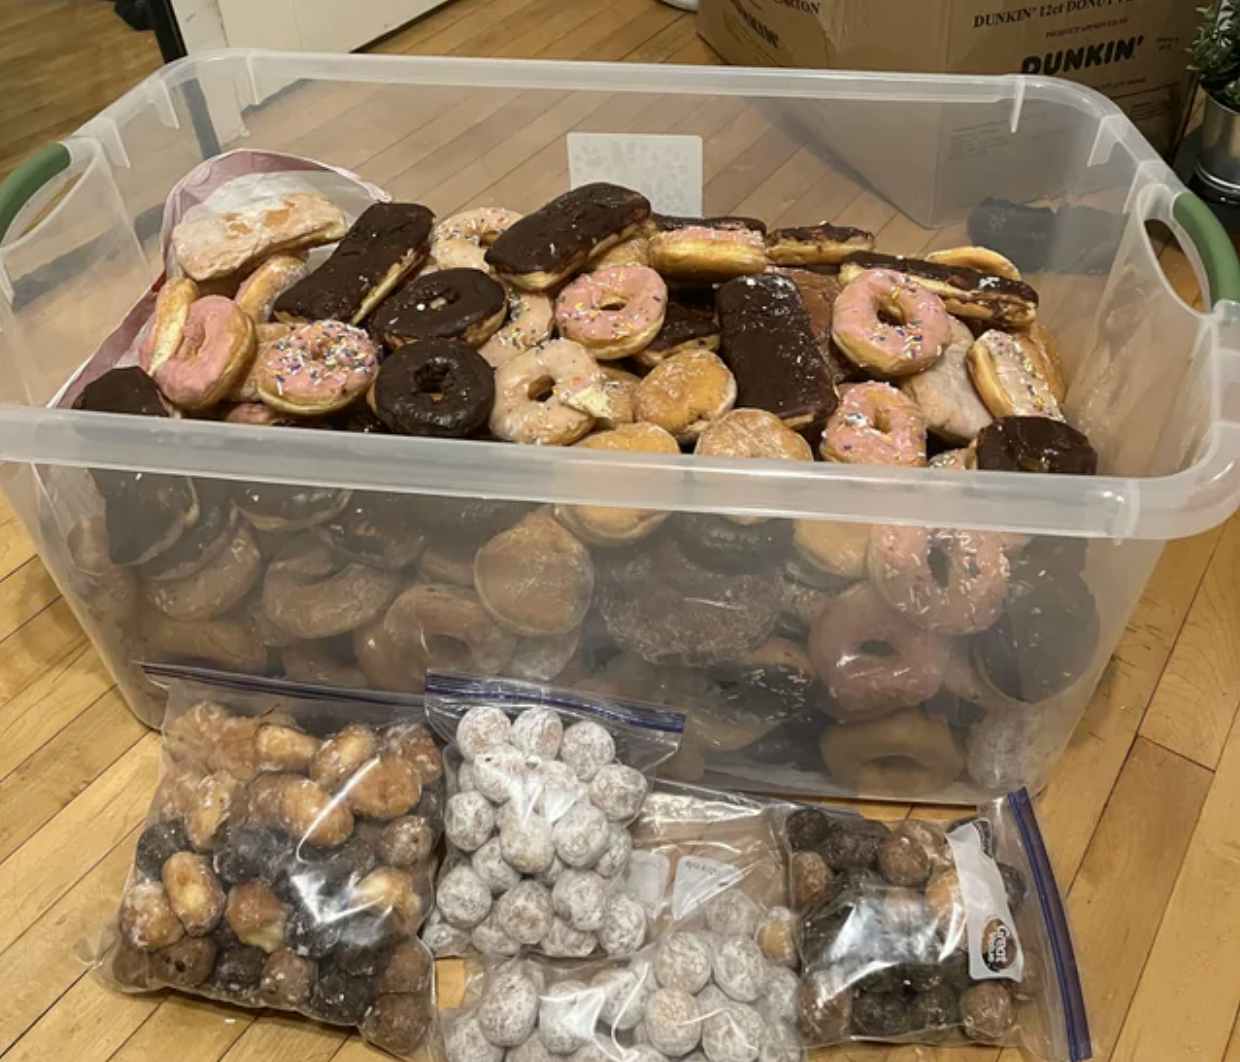 Donuts recovered from a Dunkin dumpster